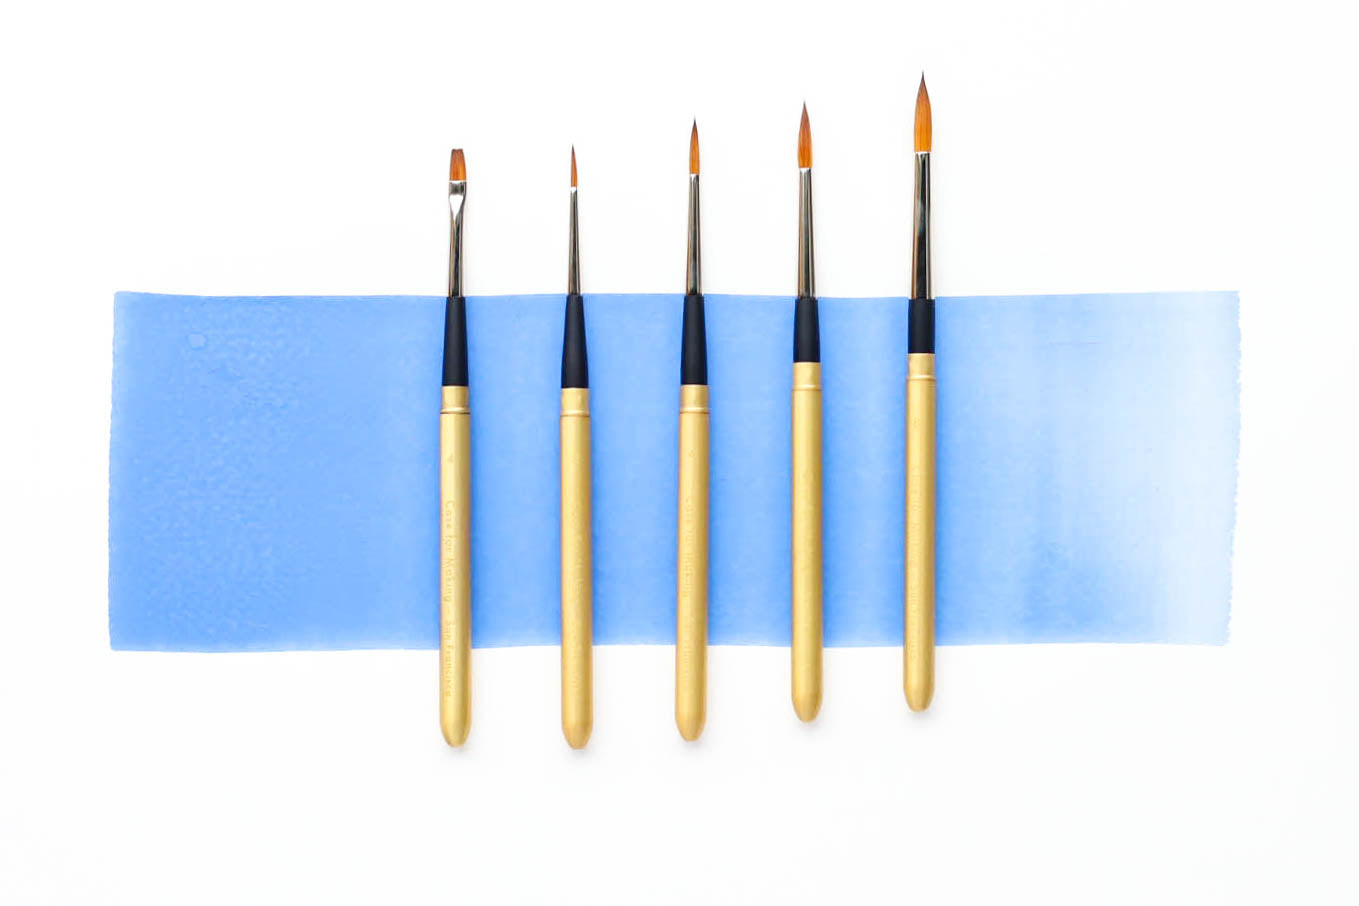 Five sizes in a row of Case for Making Matte Gold Travel Brushes.  From left to right: flat size 2, round size 2, round size 4, round size 6, round size 8.